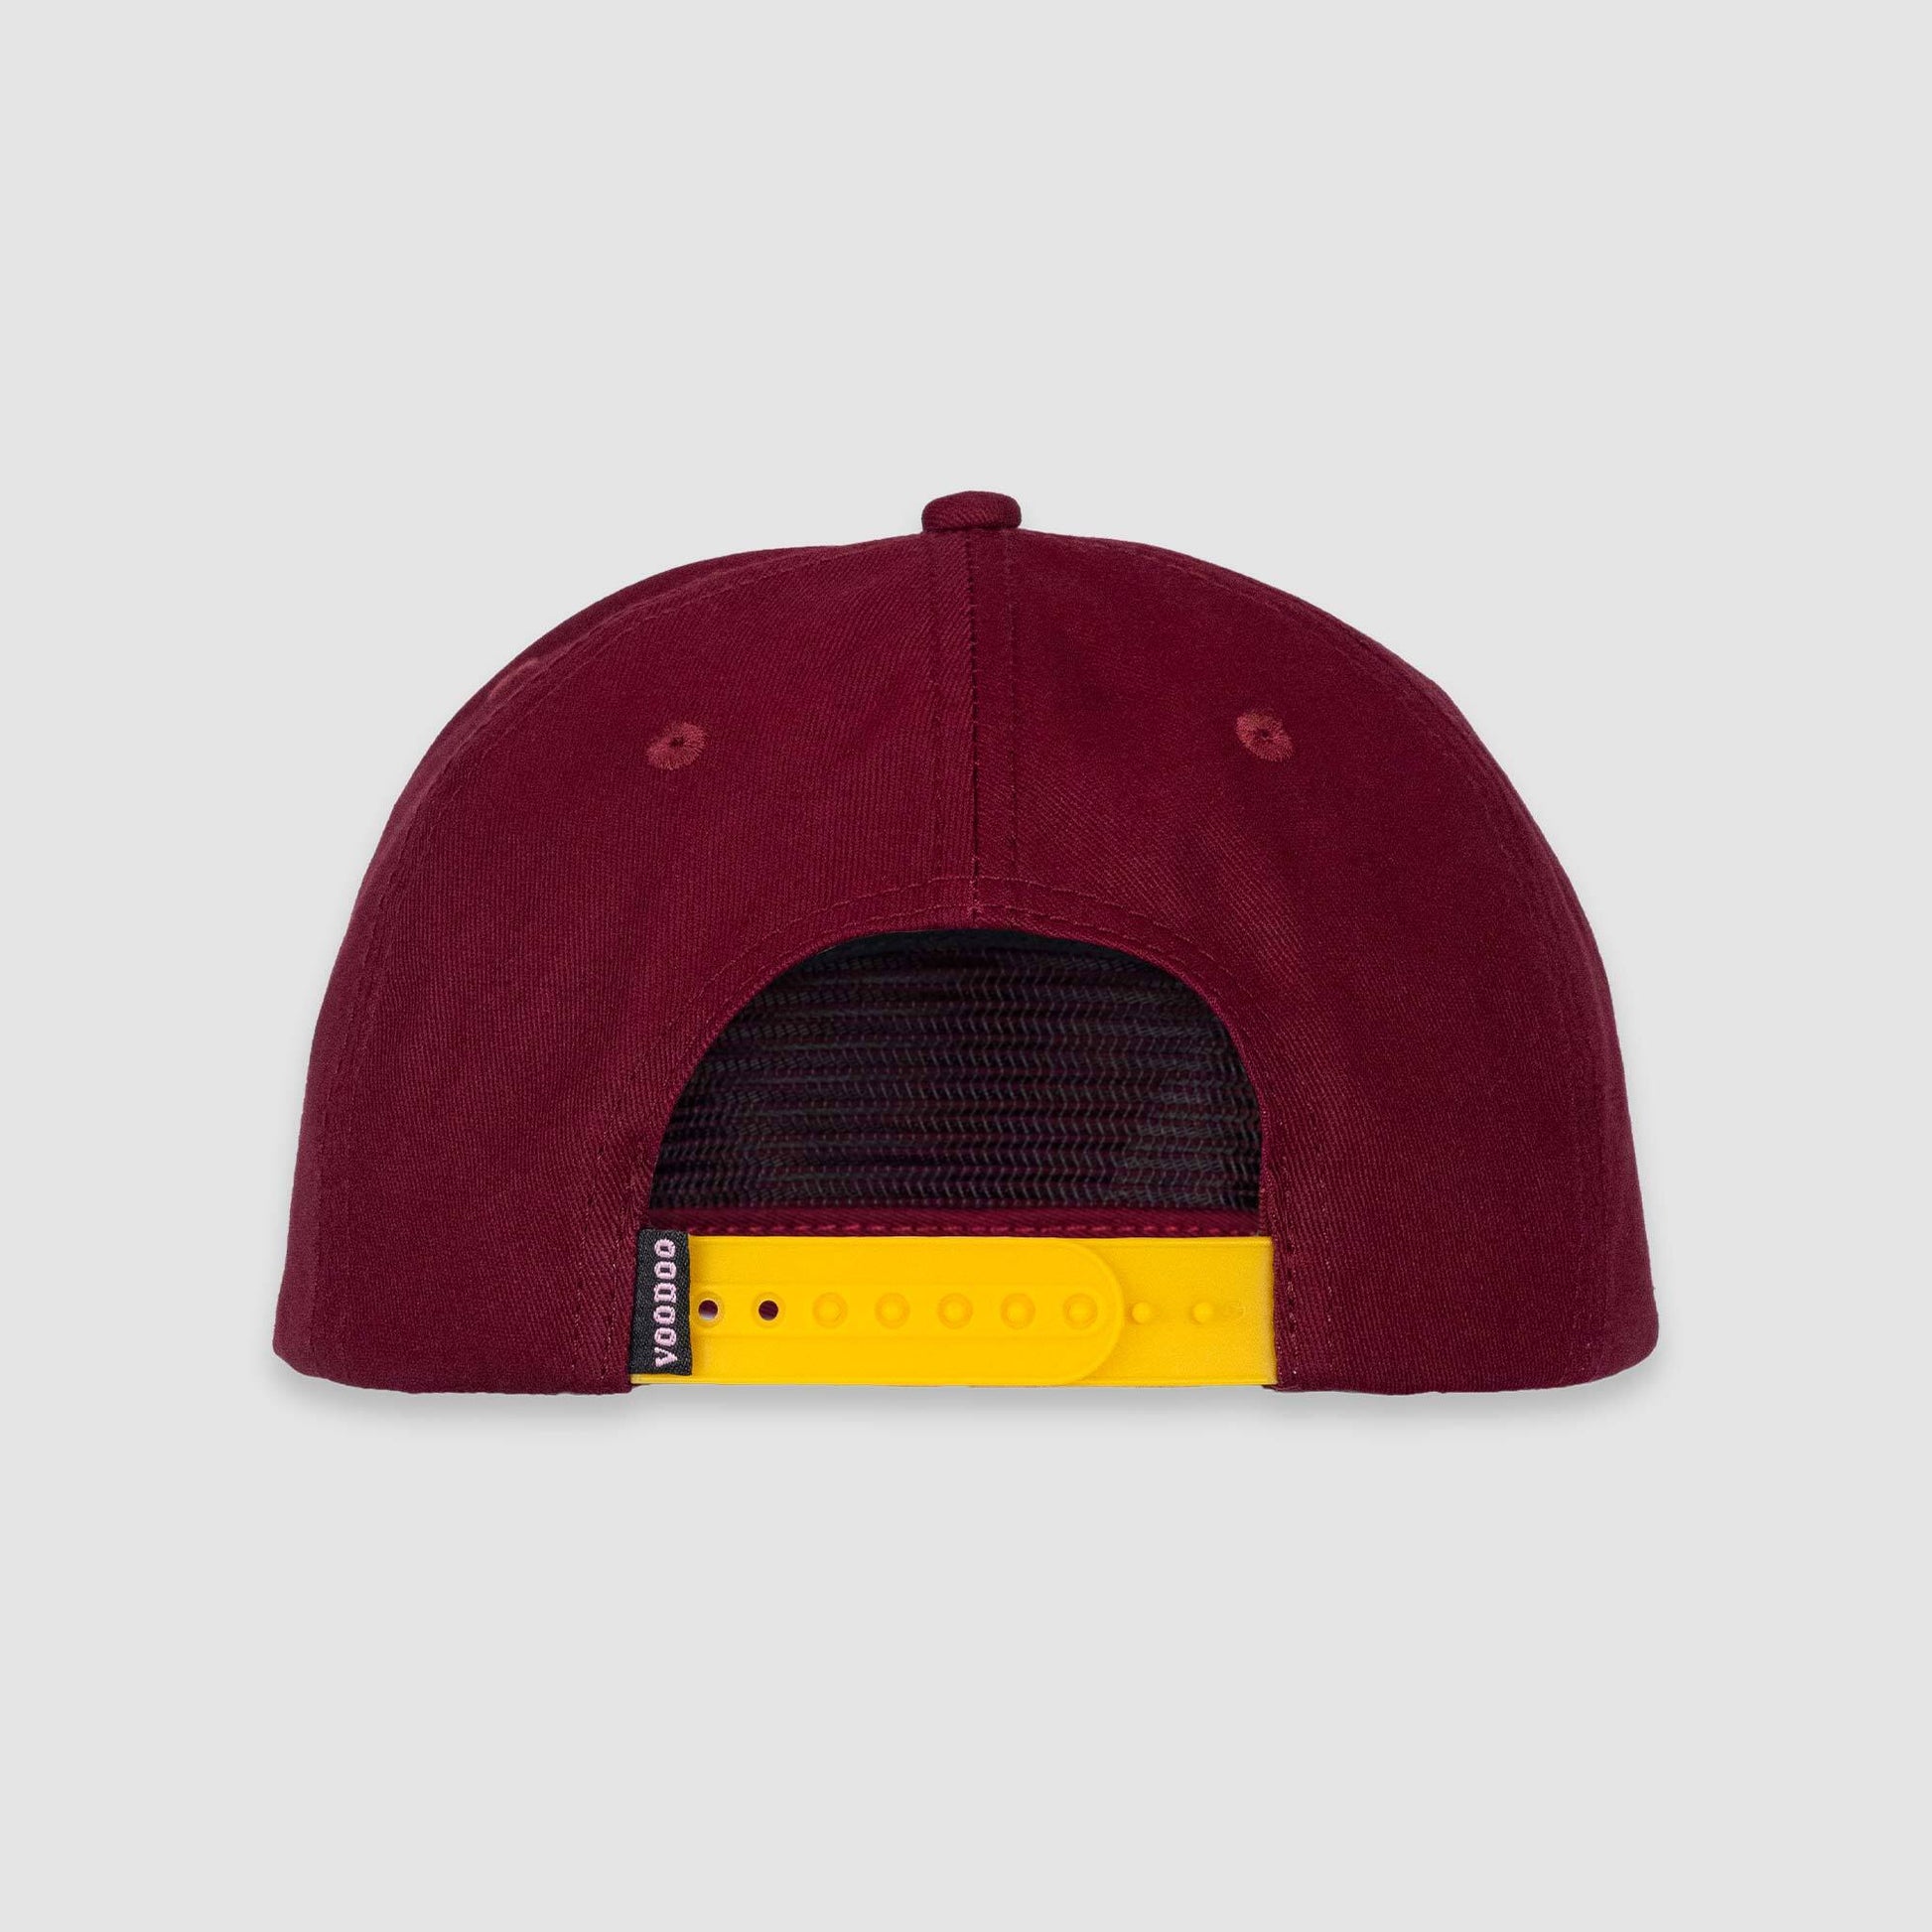 maroon and yellow cap, back of cap image